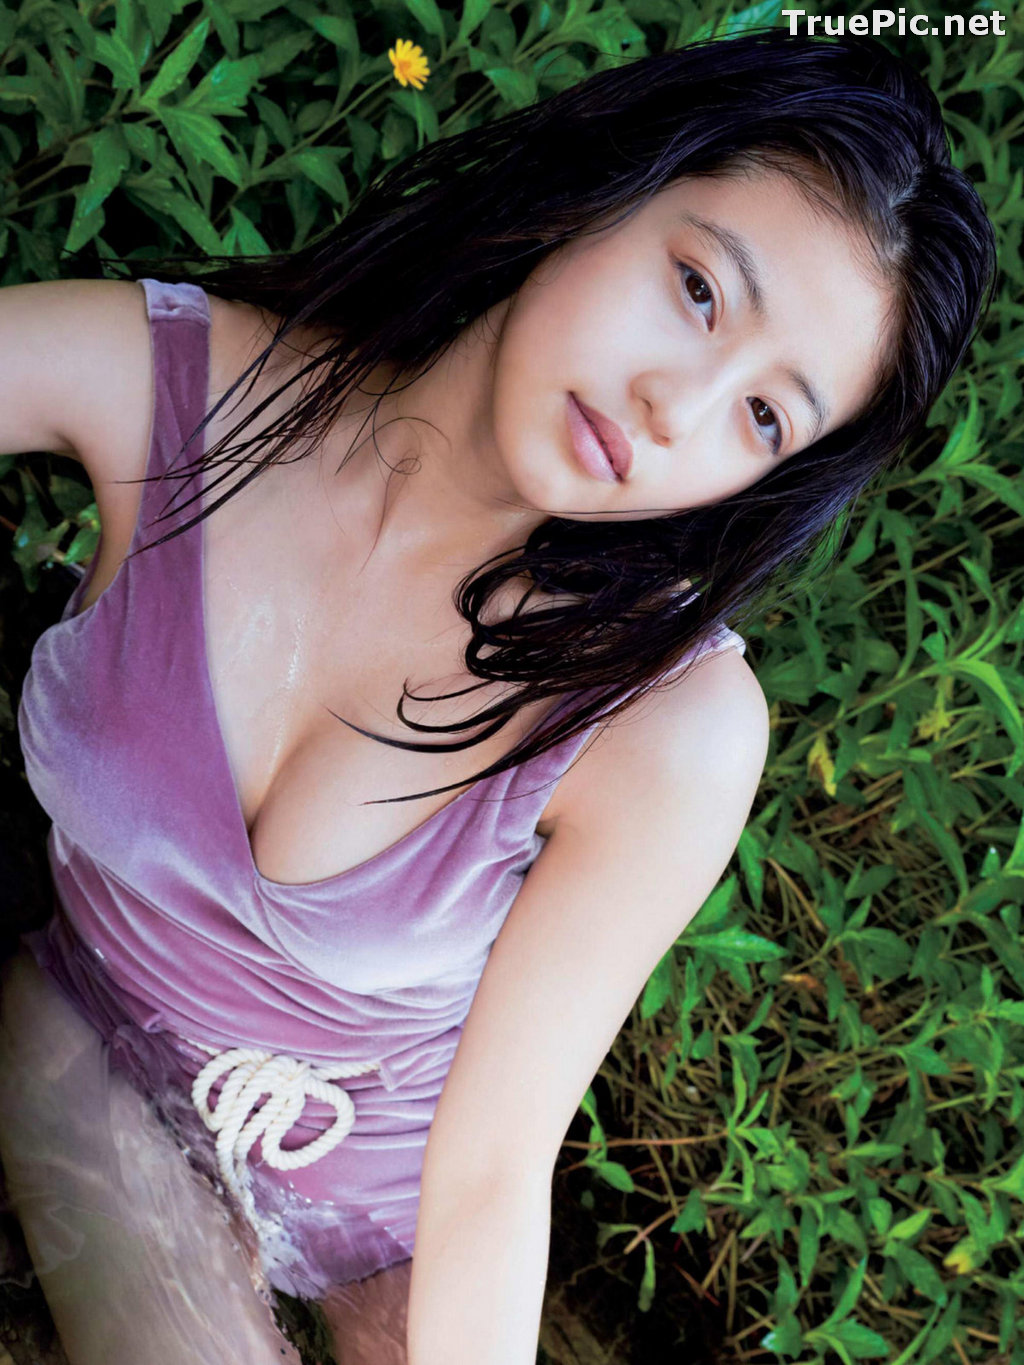 Image Japanese Actress and Model - Mio Imada (今田美櫻) - Sexy Picture Collection 2020 - TruePic.net - Picture-288